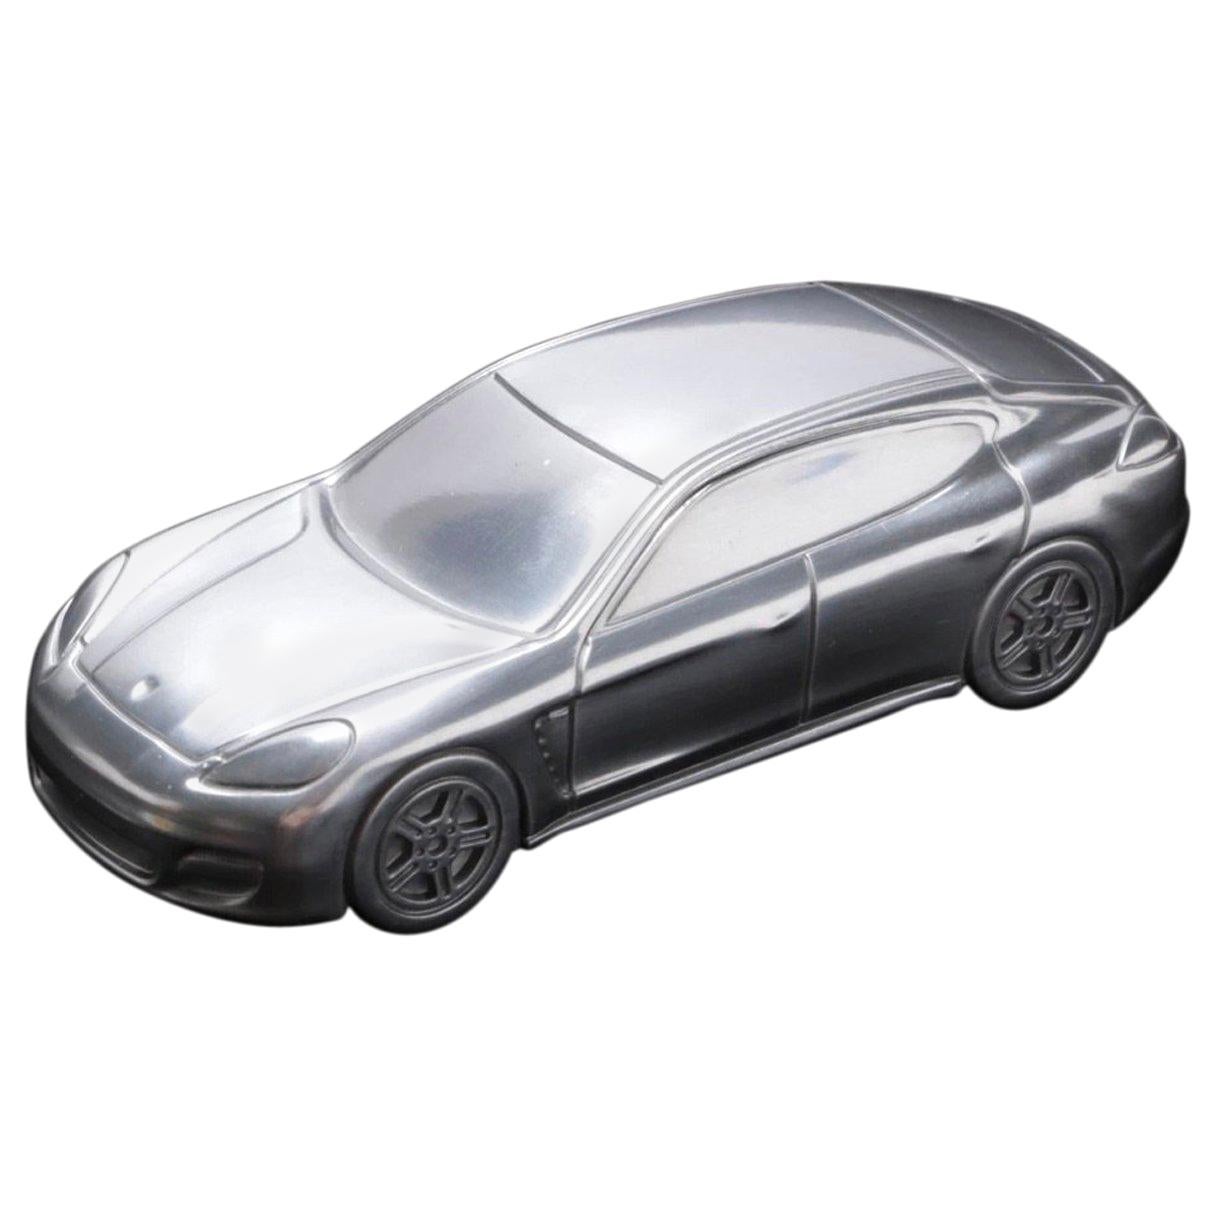 Tycoon’s Silver Porsche-Panamera Turbo-Limited Edition Model For Sale